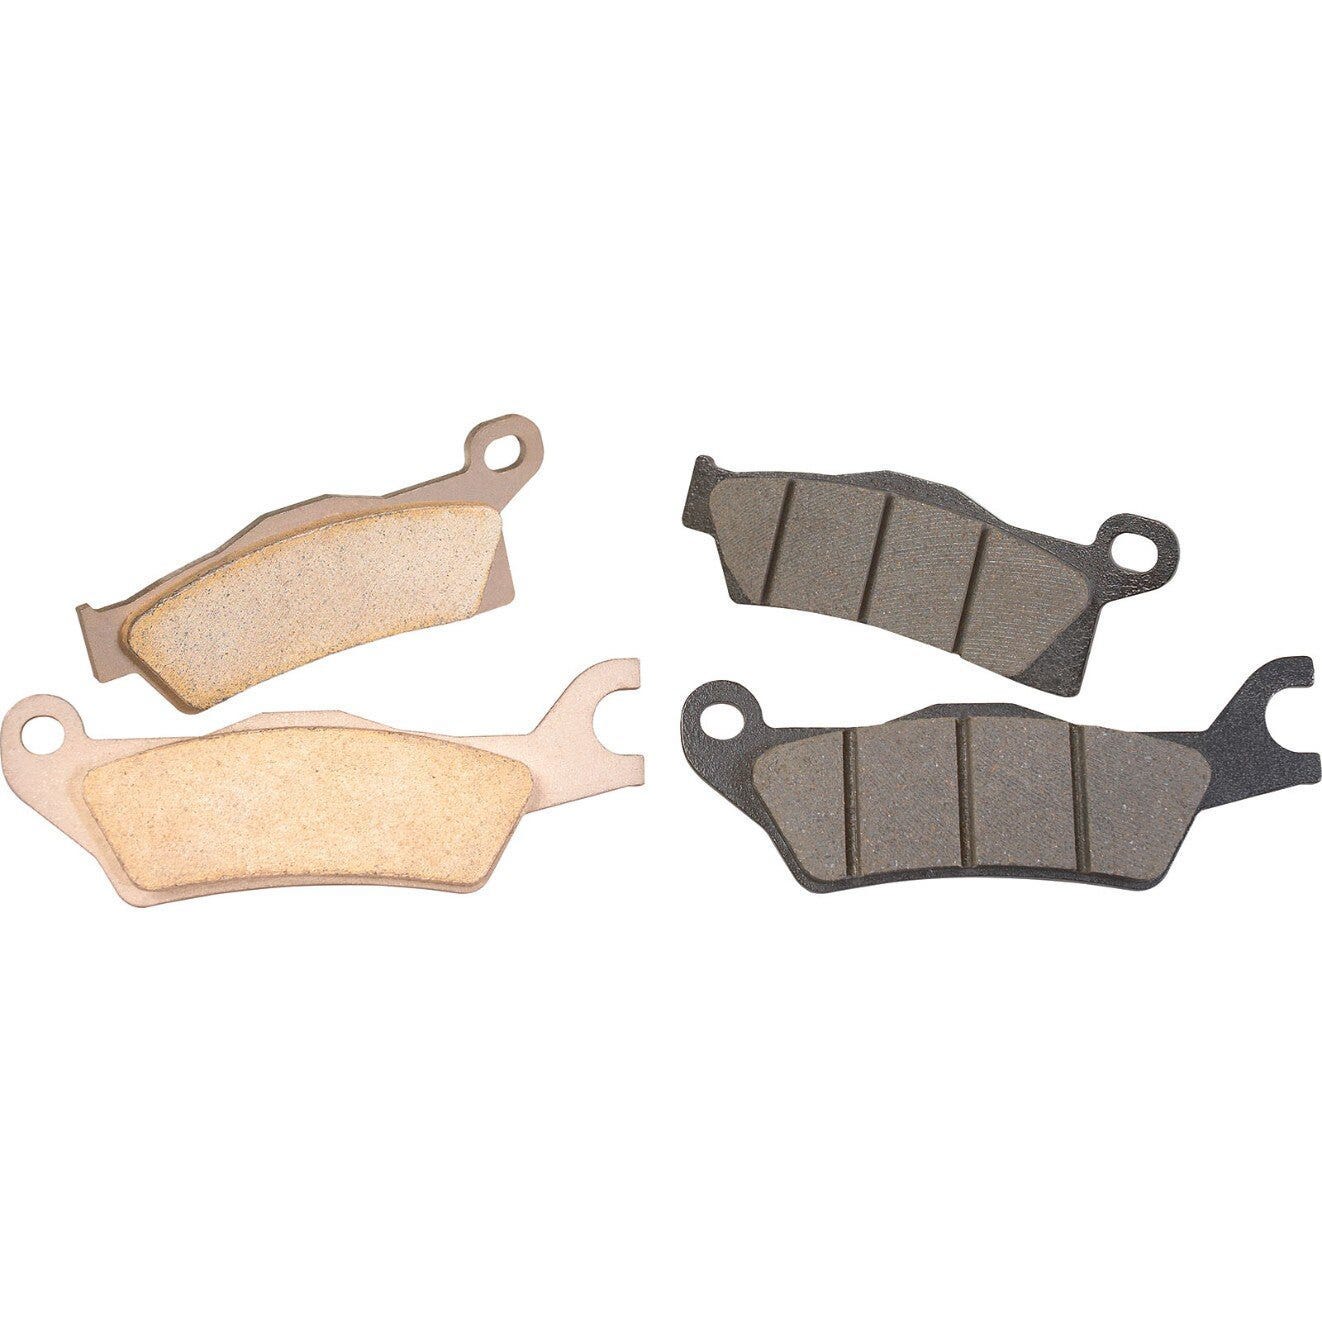 Can-am Metallic Brake Pad Kit - Front & Rear Right 715900248 - The Parts Lodge